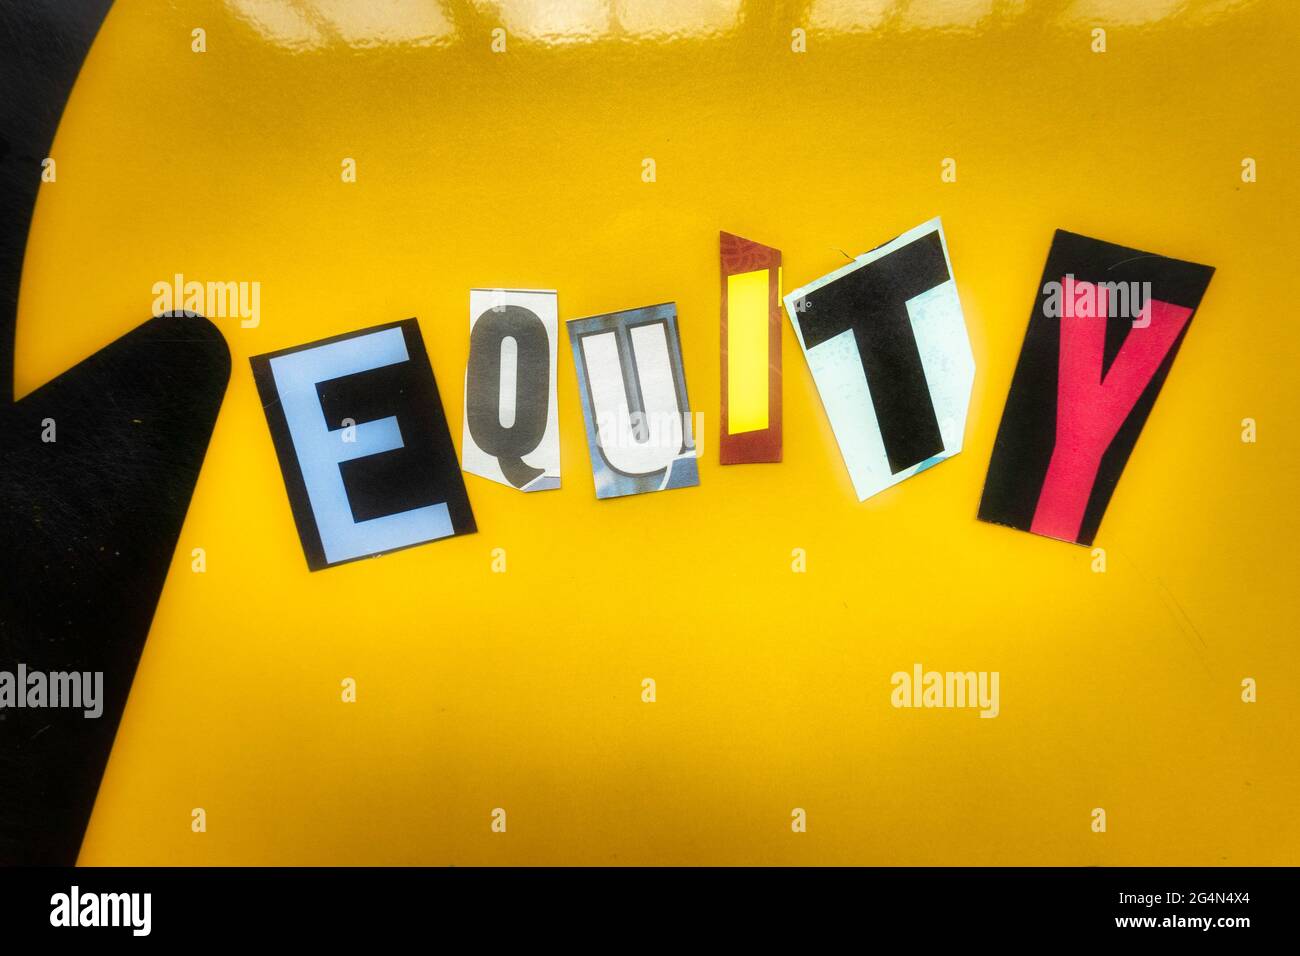 The word 'Equity' using cut-out paper letters in the ransom note effect typography Stock Photo